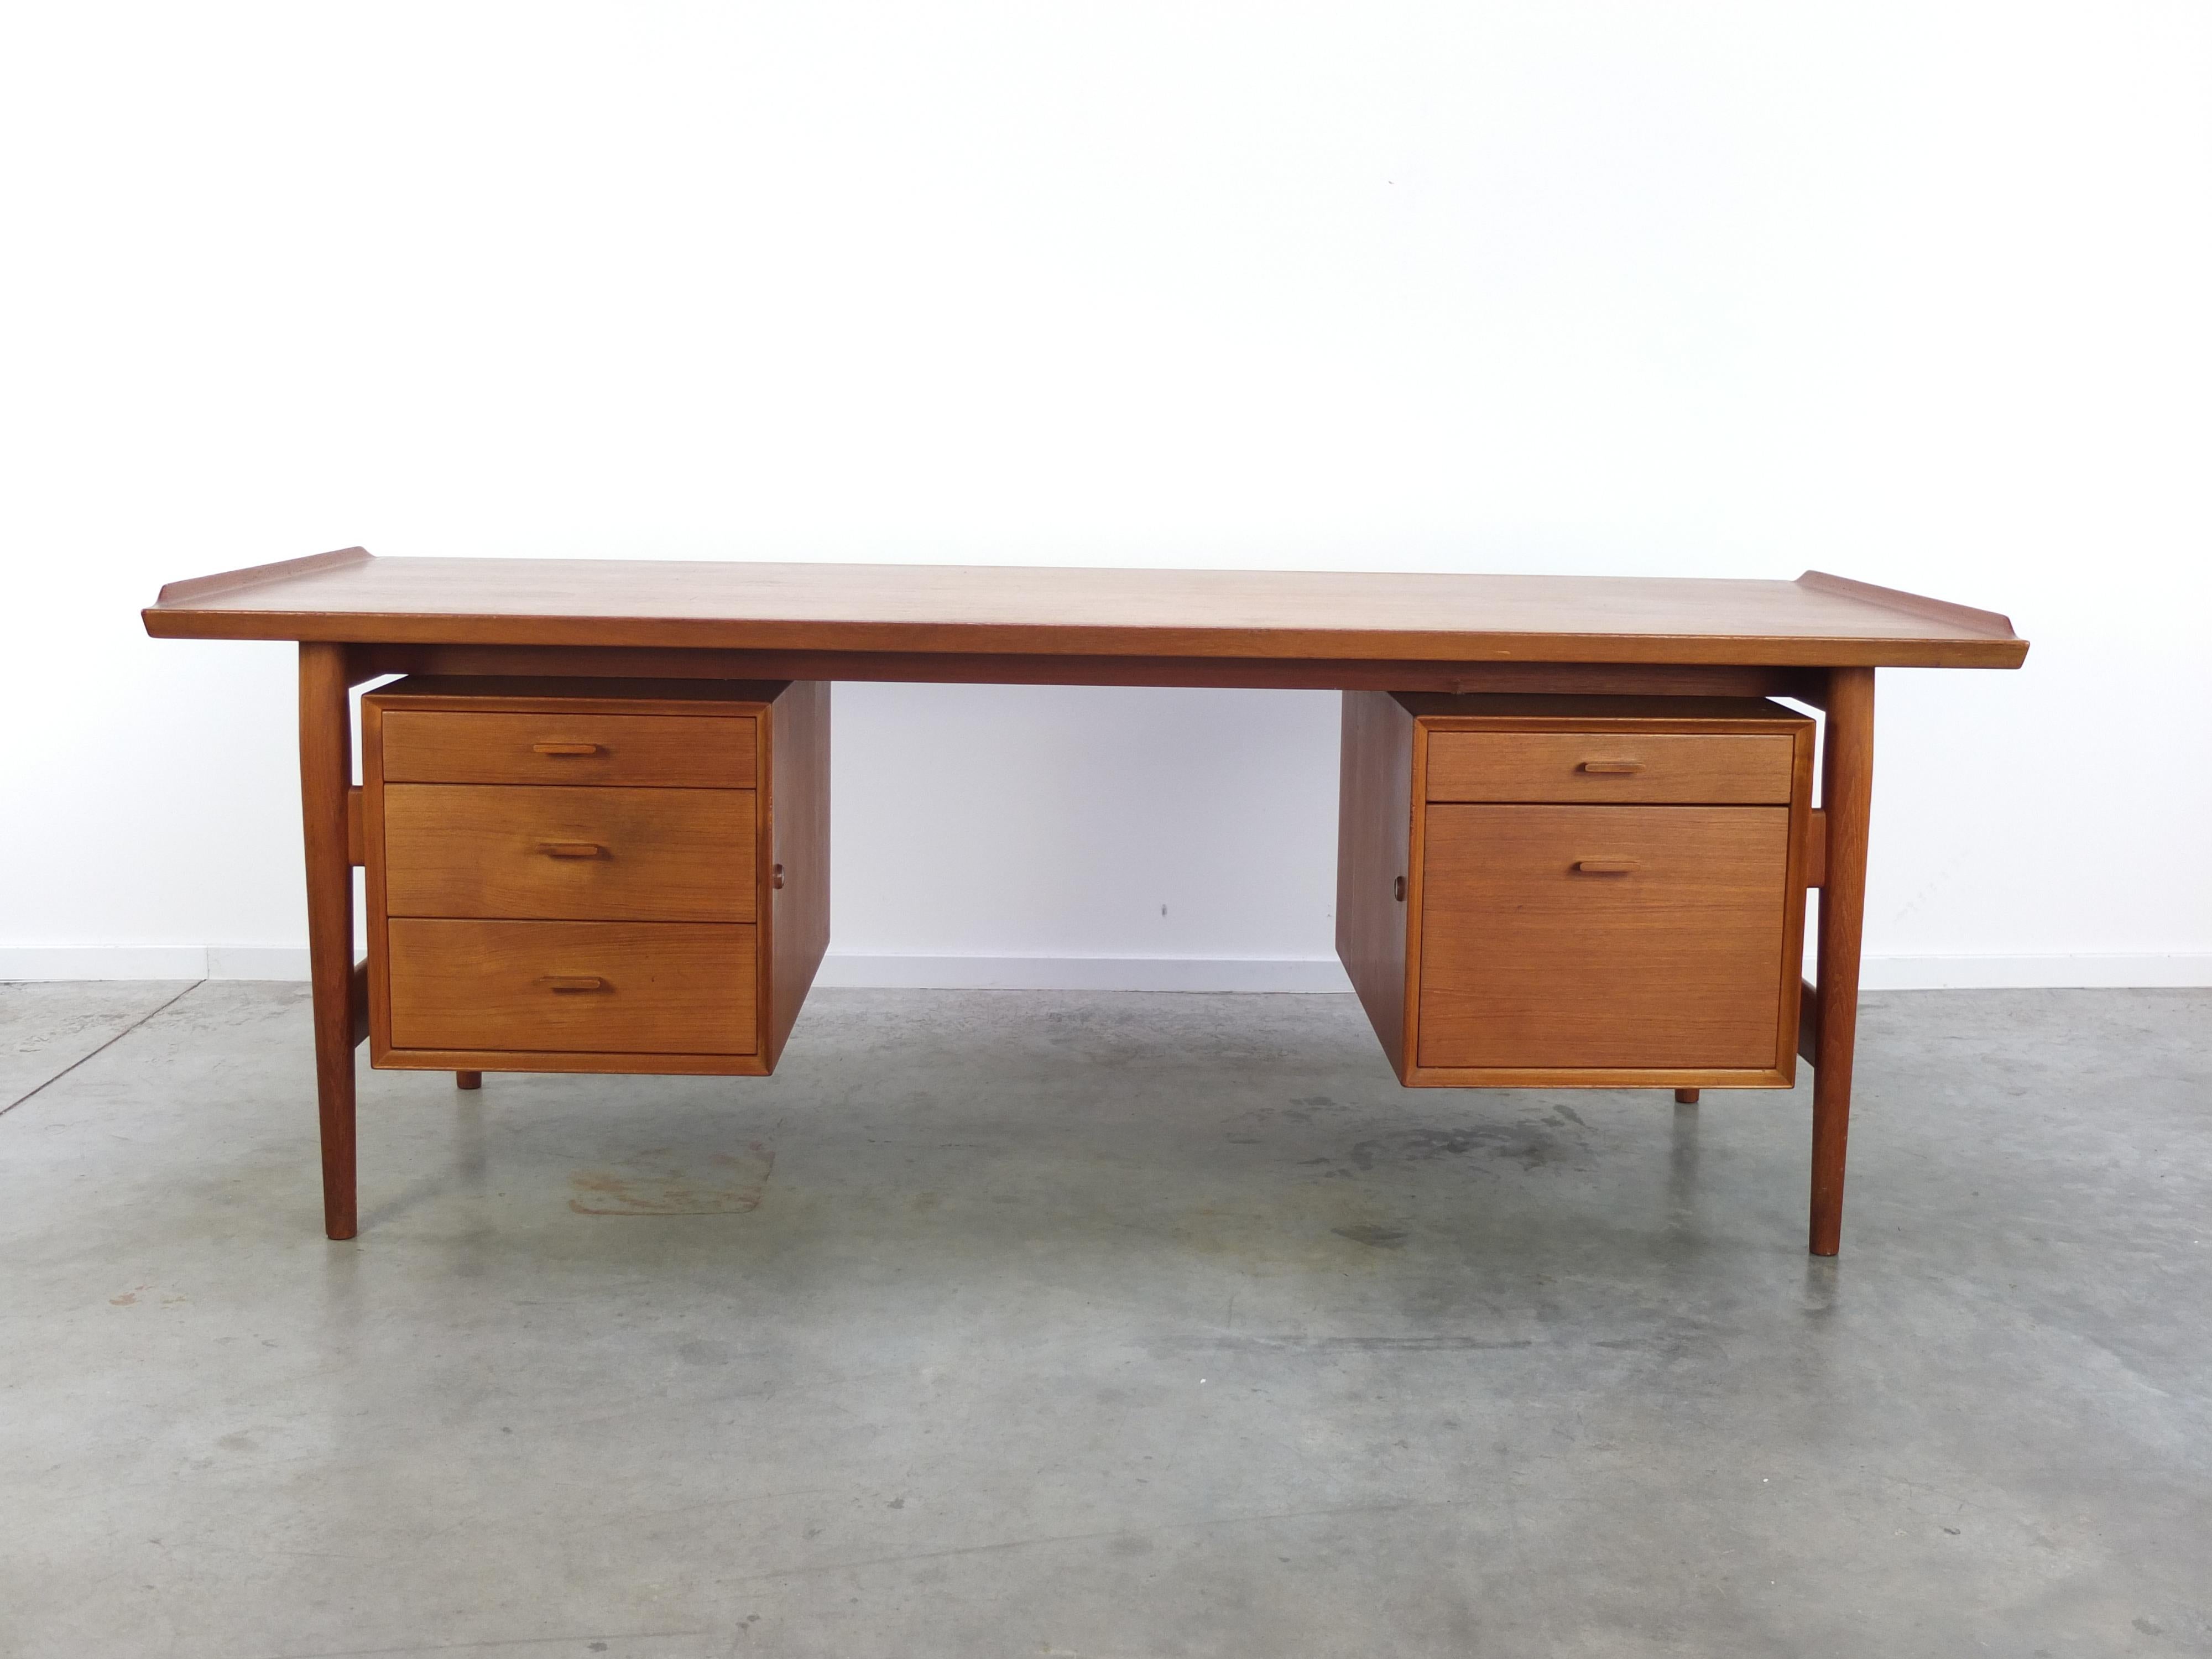 Large executive desk designed by Arne Vodder in the 1950s. This is ‘Model 207’ made of teak wood. There are two drawers compartments and a great is detail is the raised edge on both sides of the top. The backside of this desk is fully finished so it